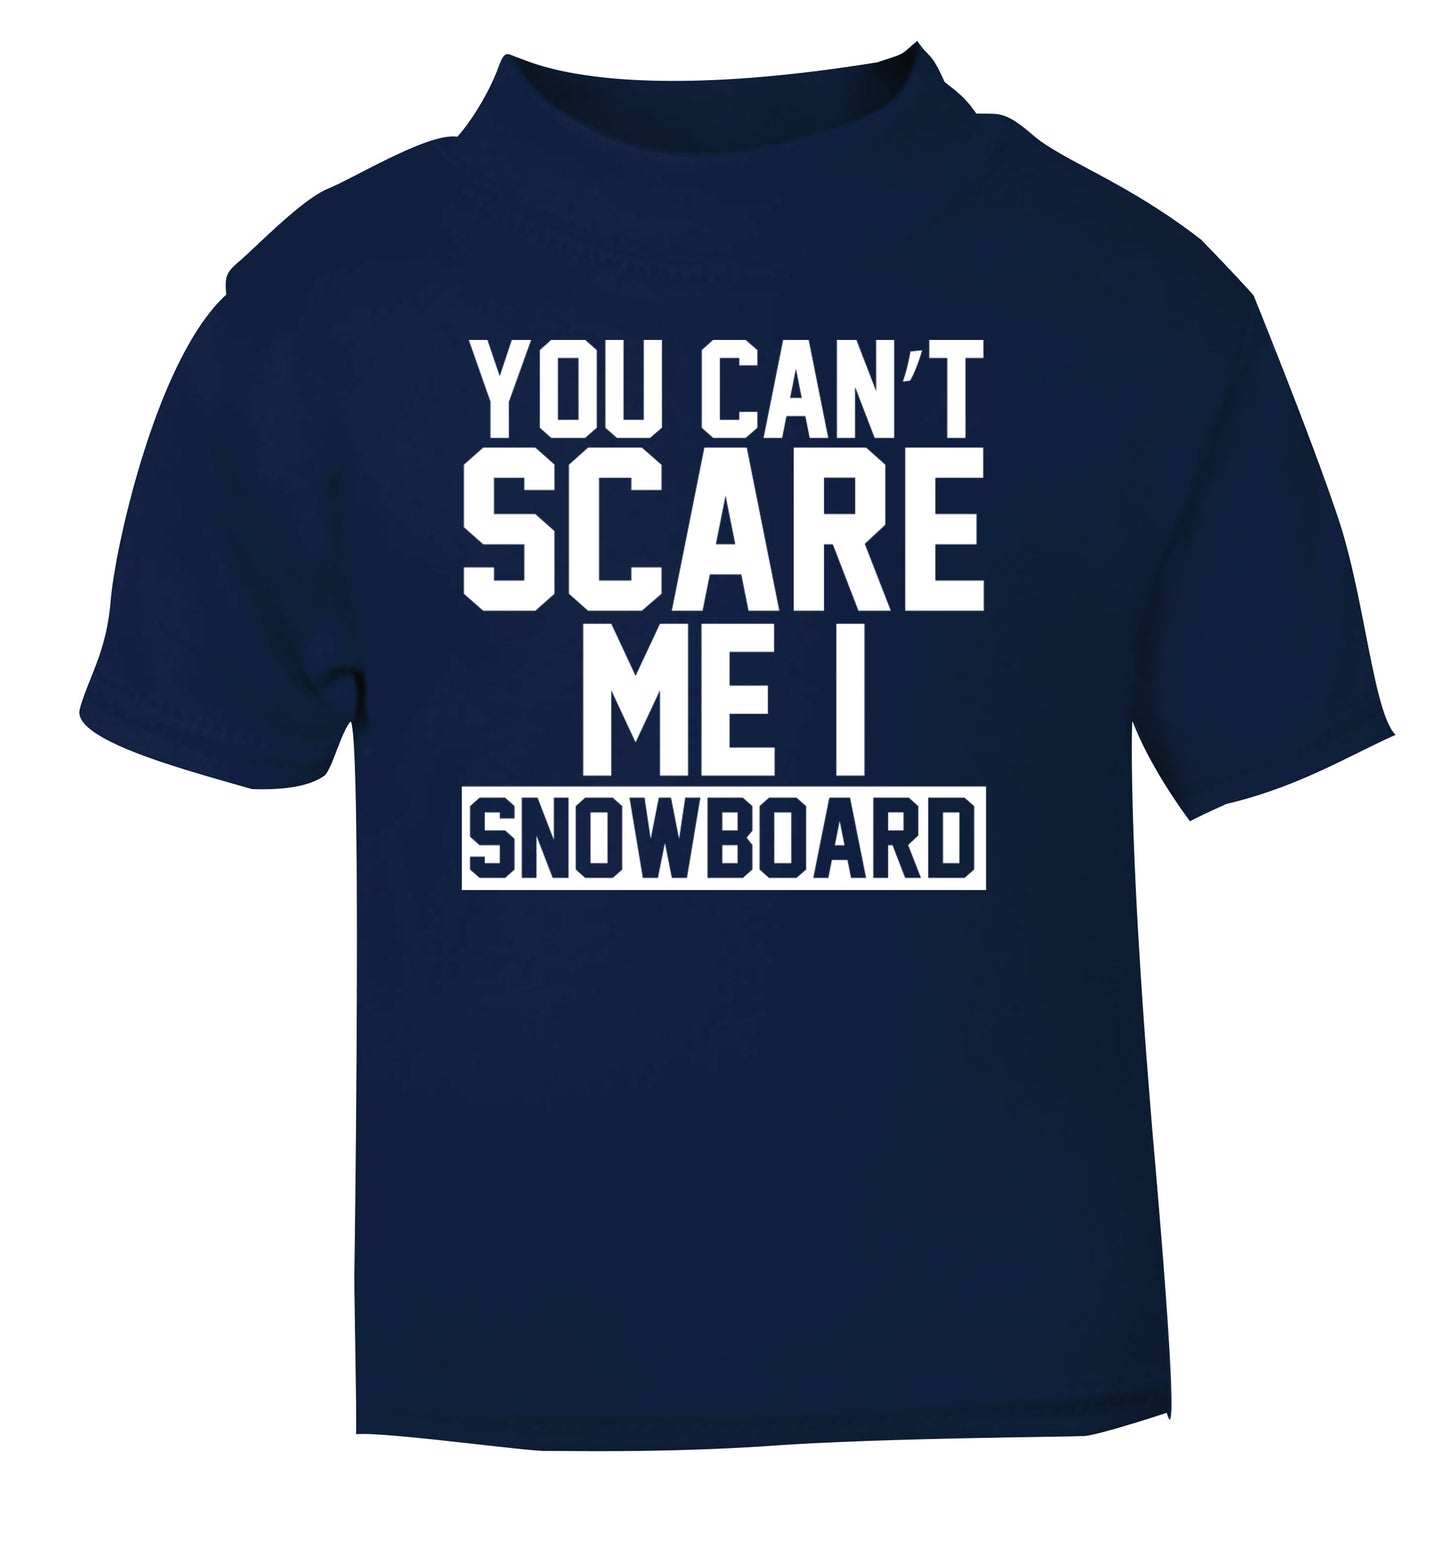 You can't scare me I snowboard navy Baby Toddler Tshirt 2 Years